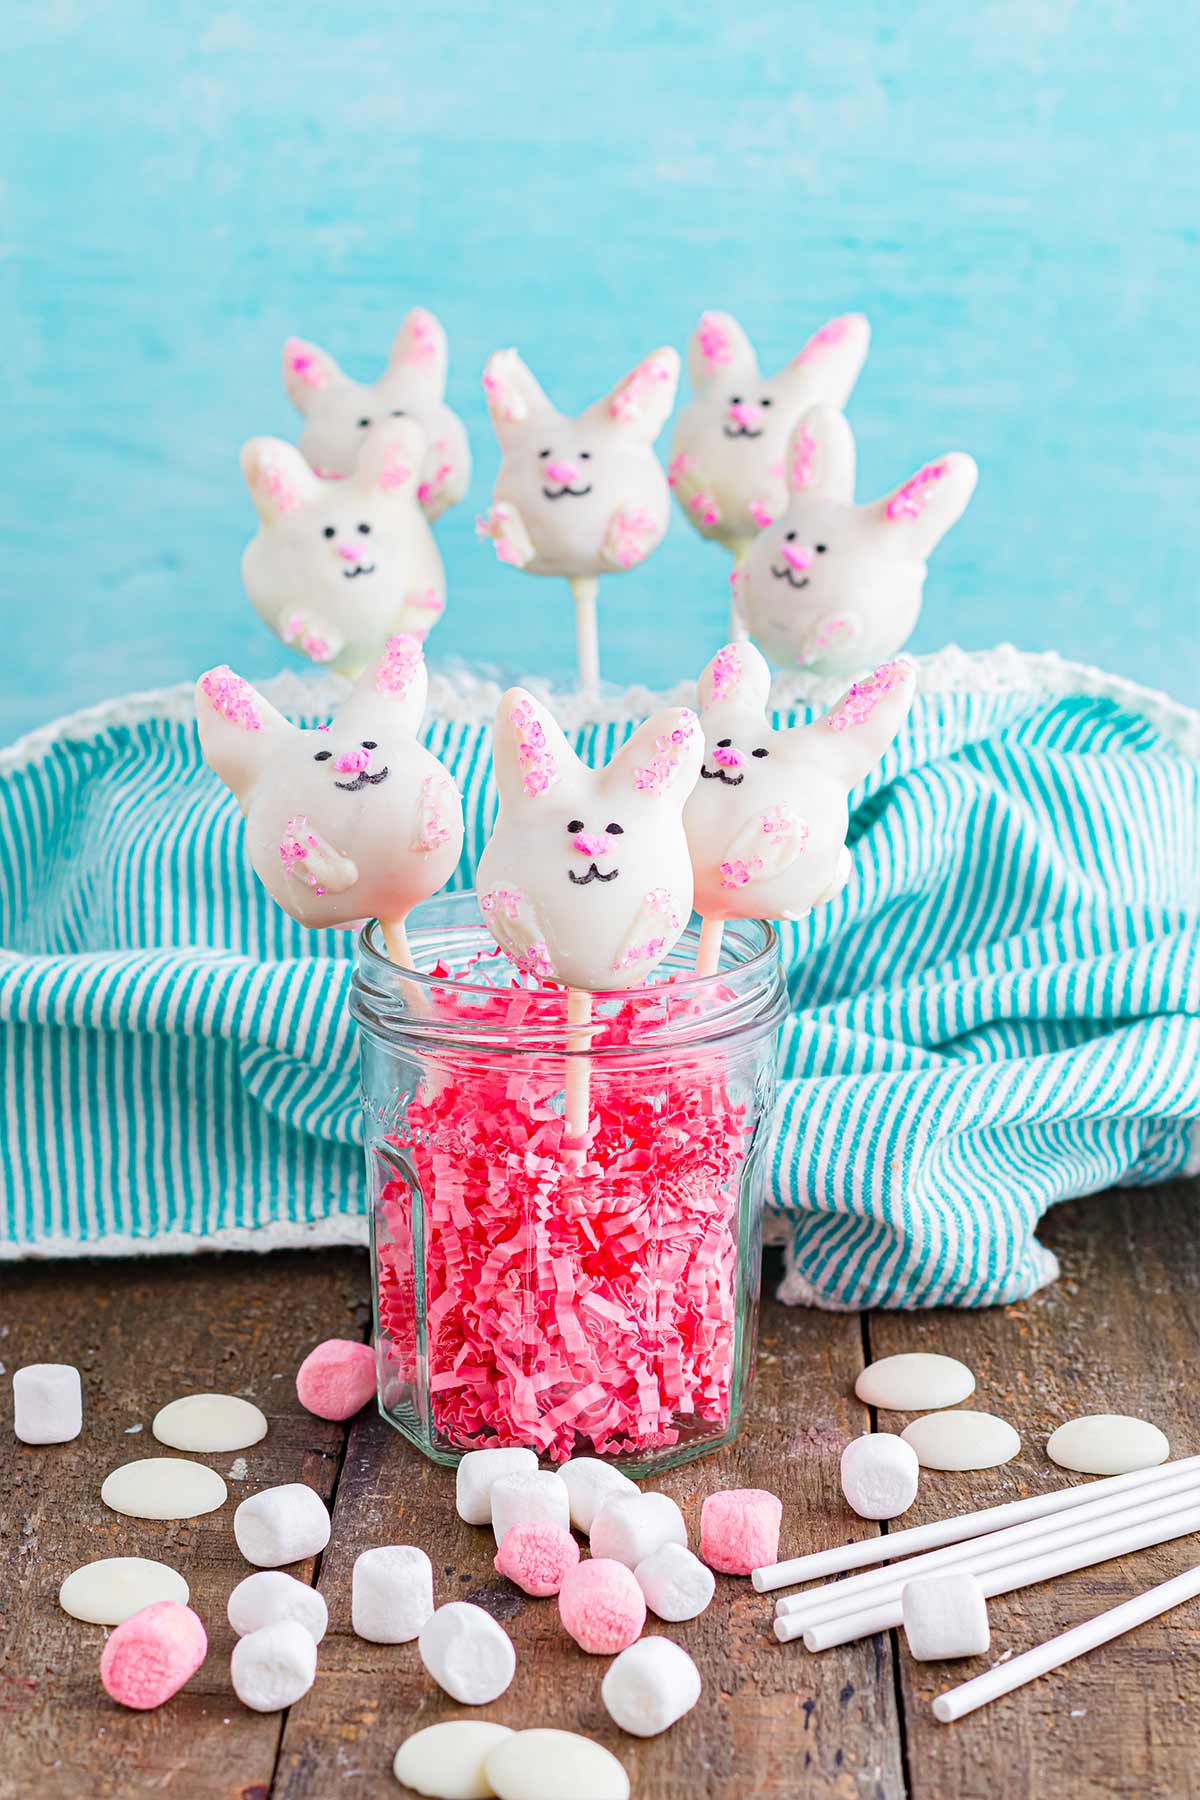 A jar with shredded pink paper and bunny cake pops inside.